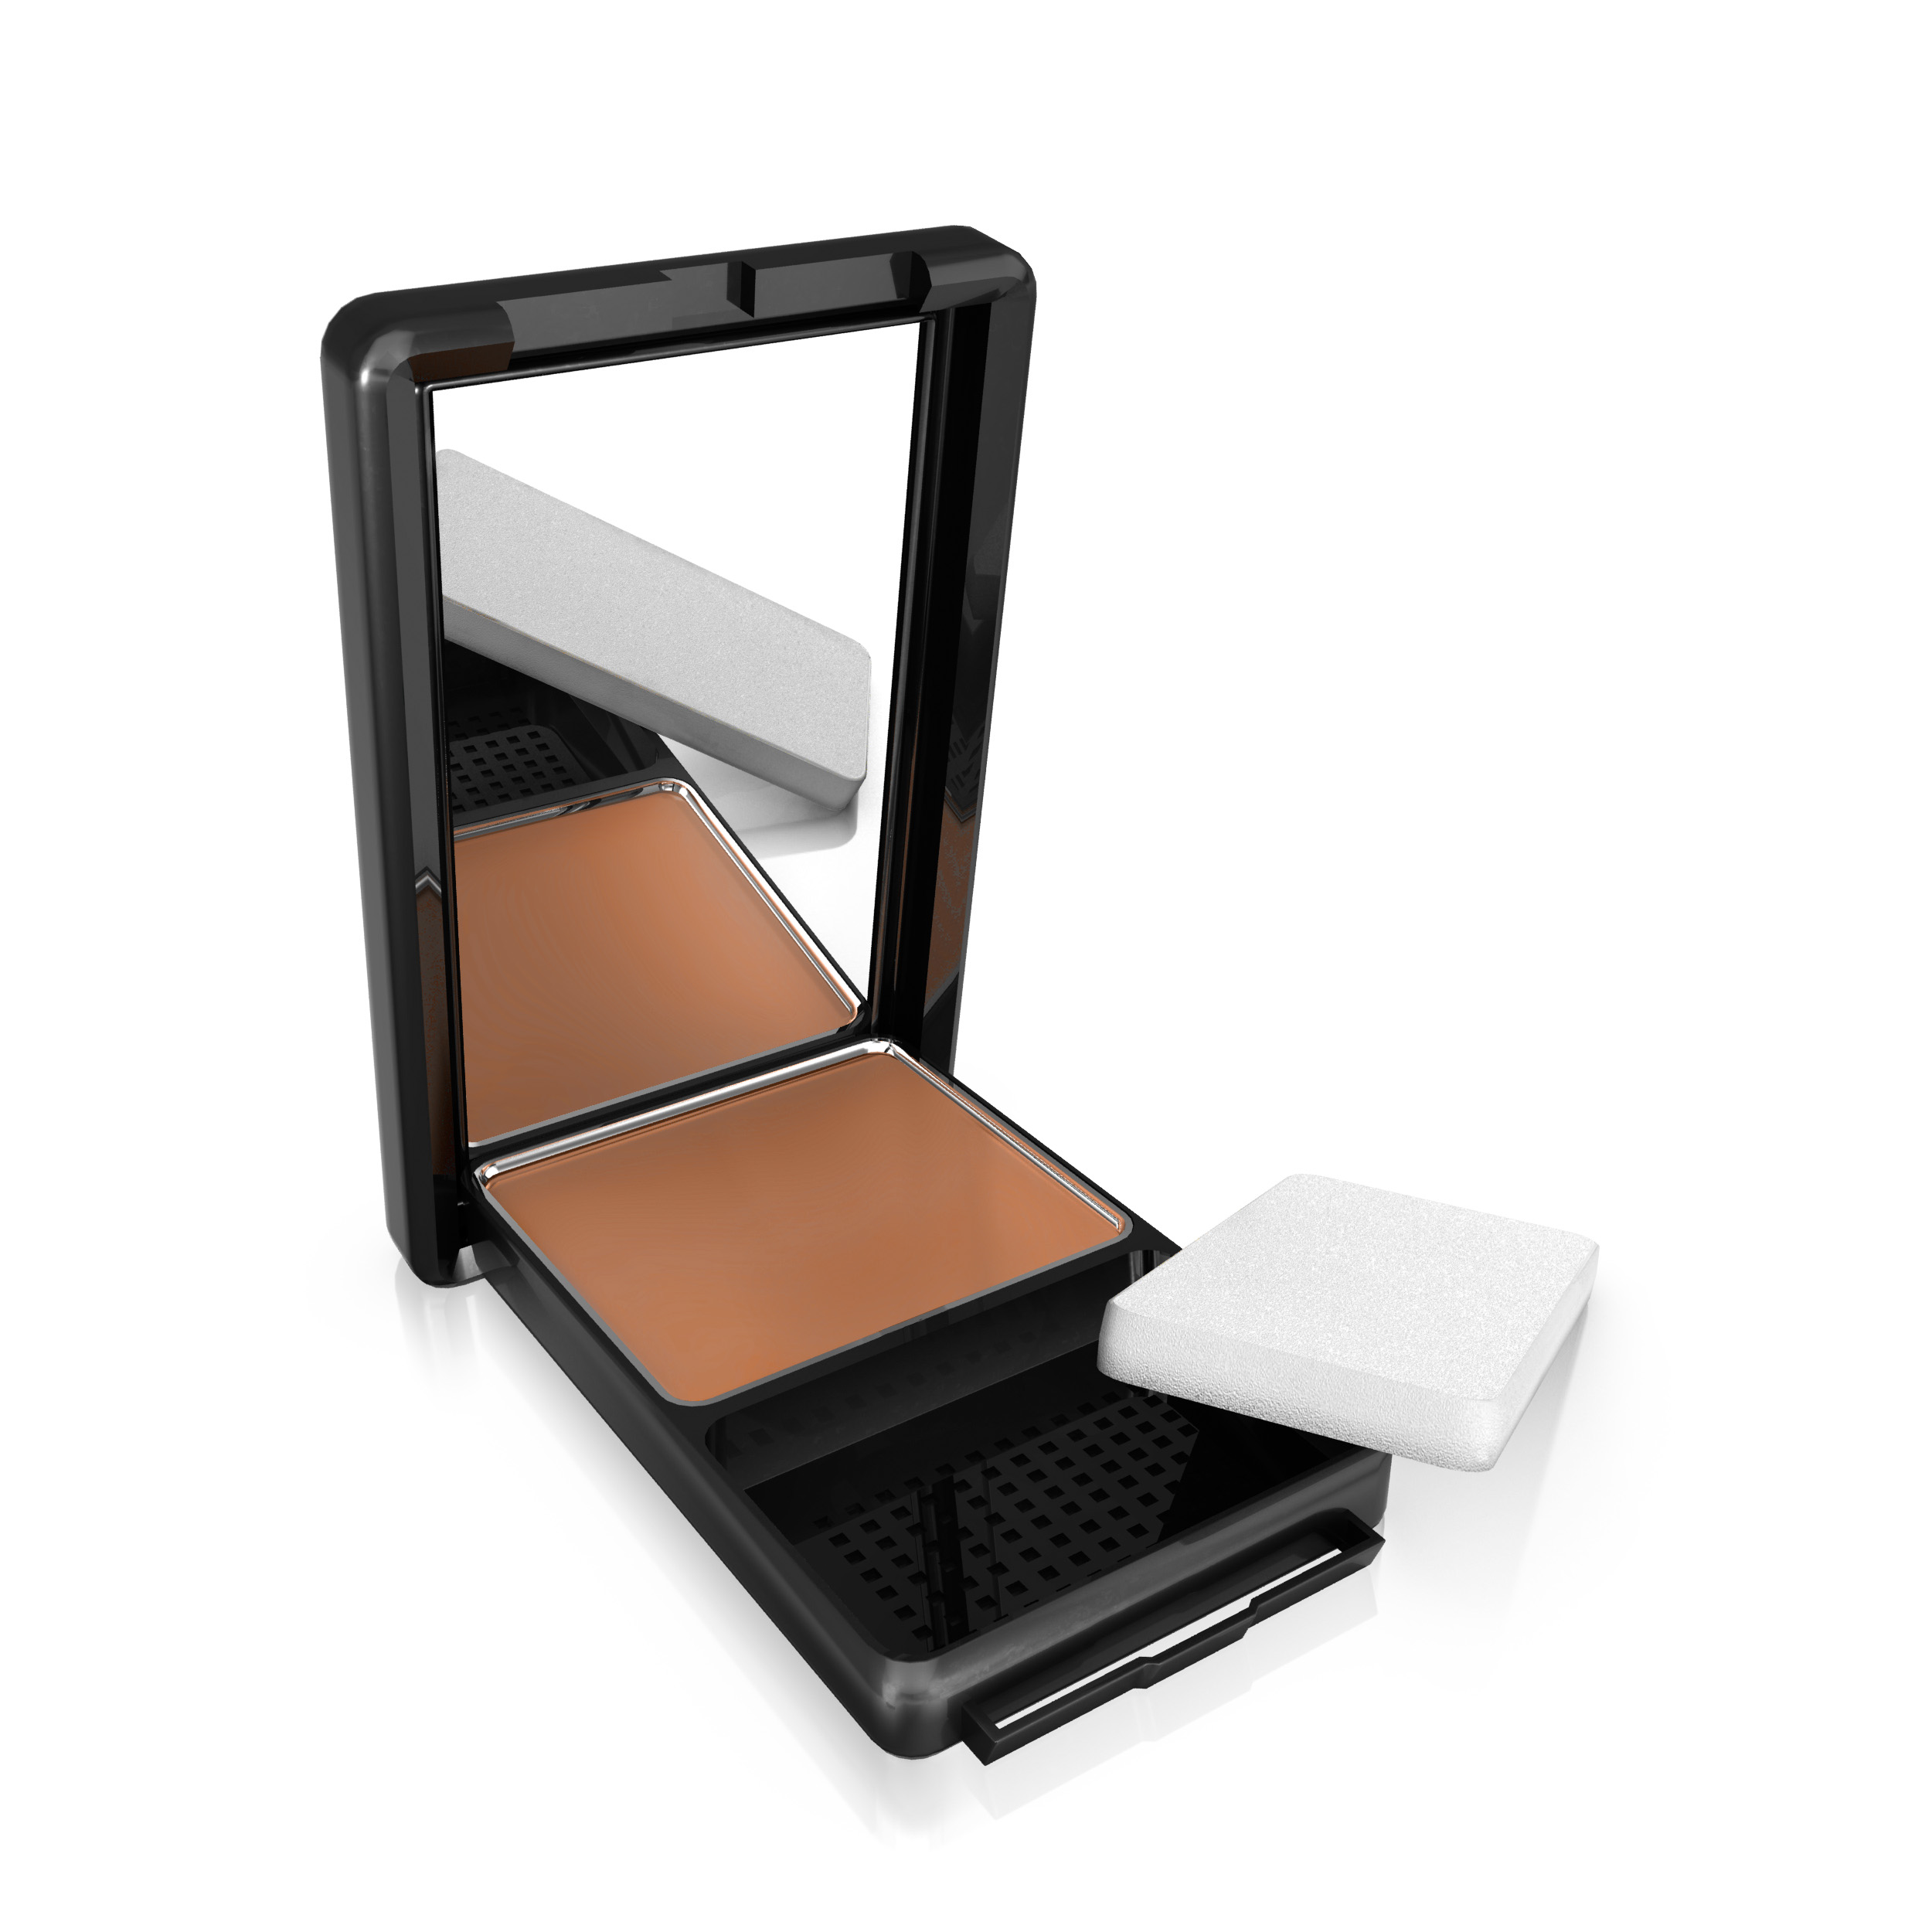 COVERGIRL Queen Natural Hue Compact Foundation, Toffee - image 2 of 4